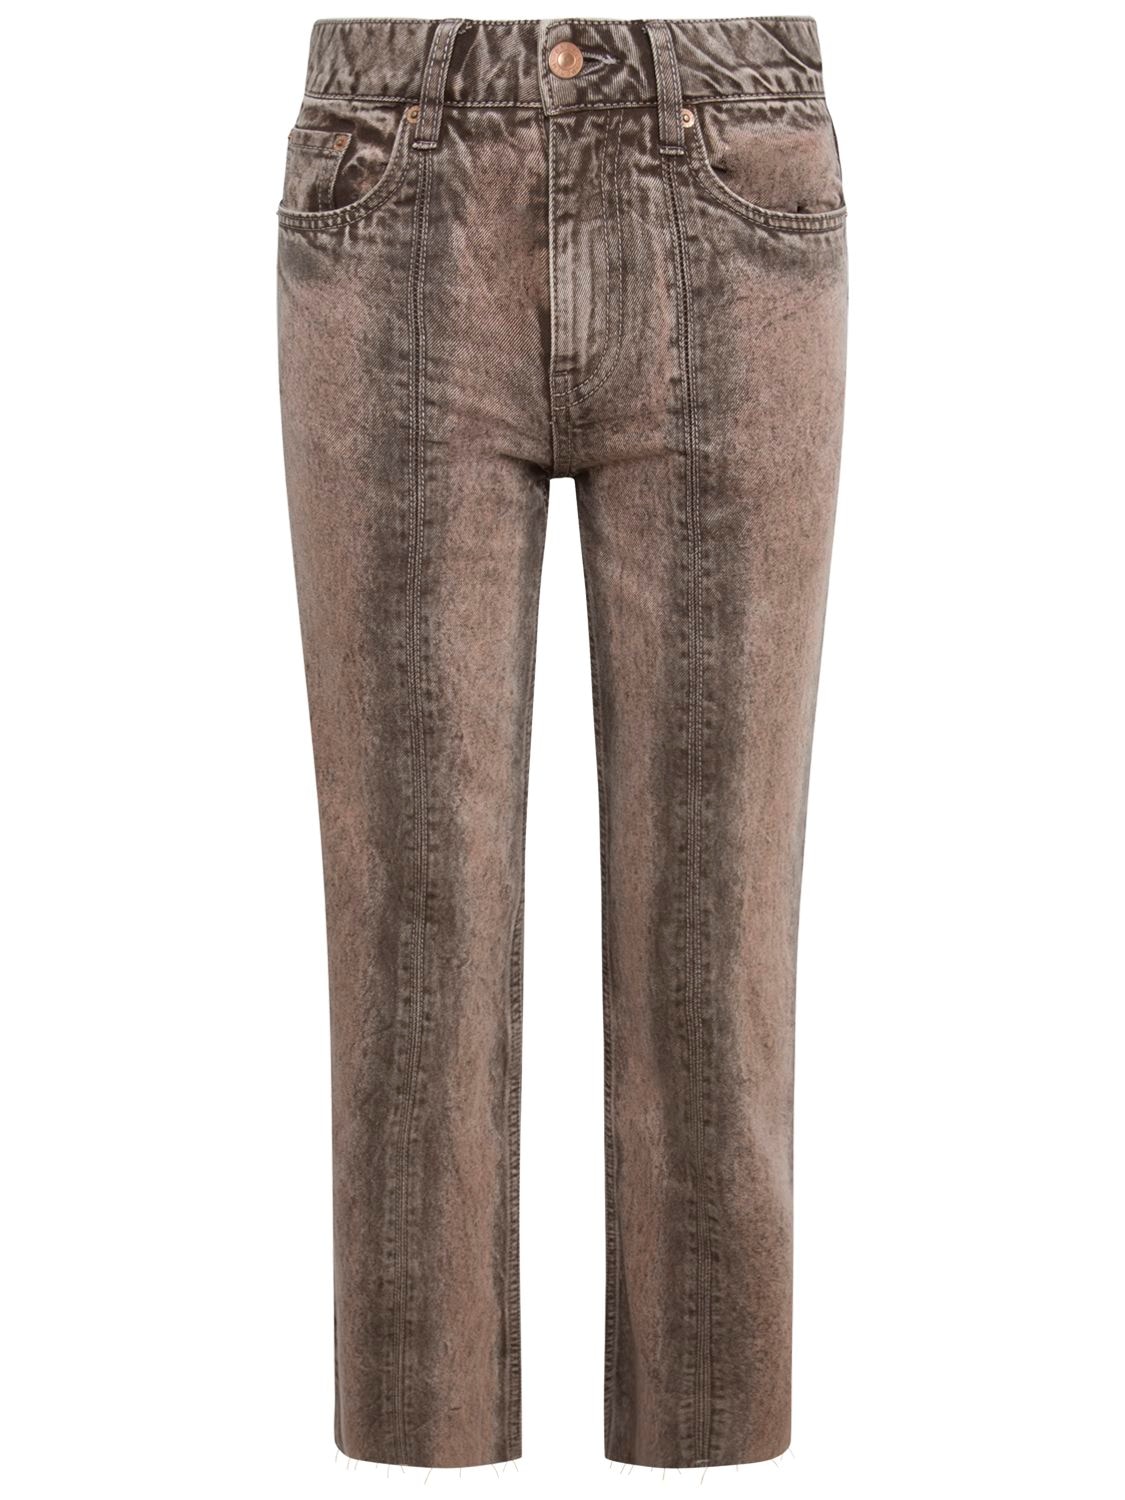 Buy Acid Wash Organic Cotton Denim Jeans for Womens at Goxip